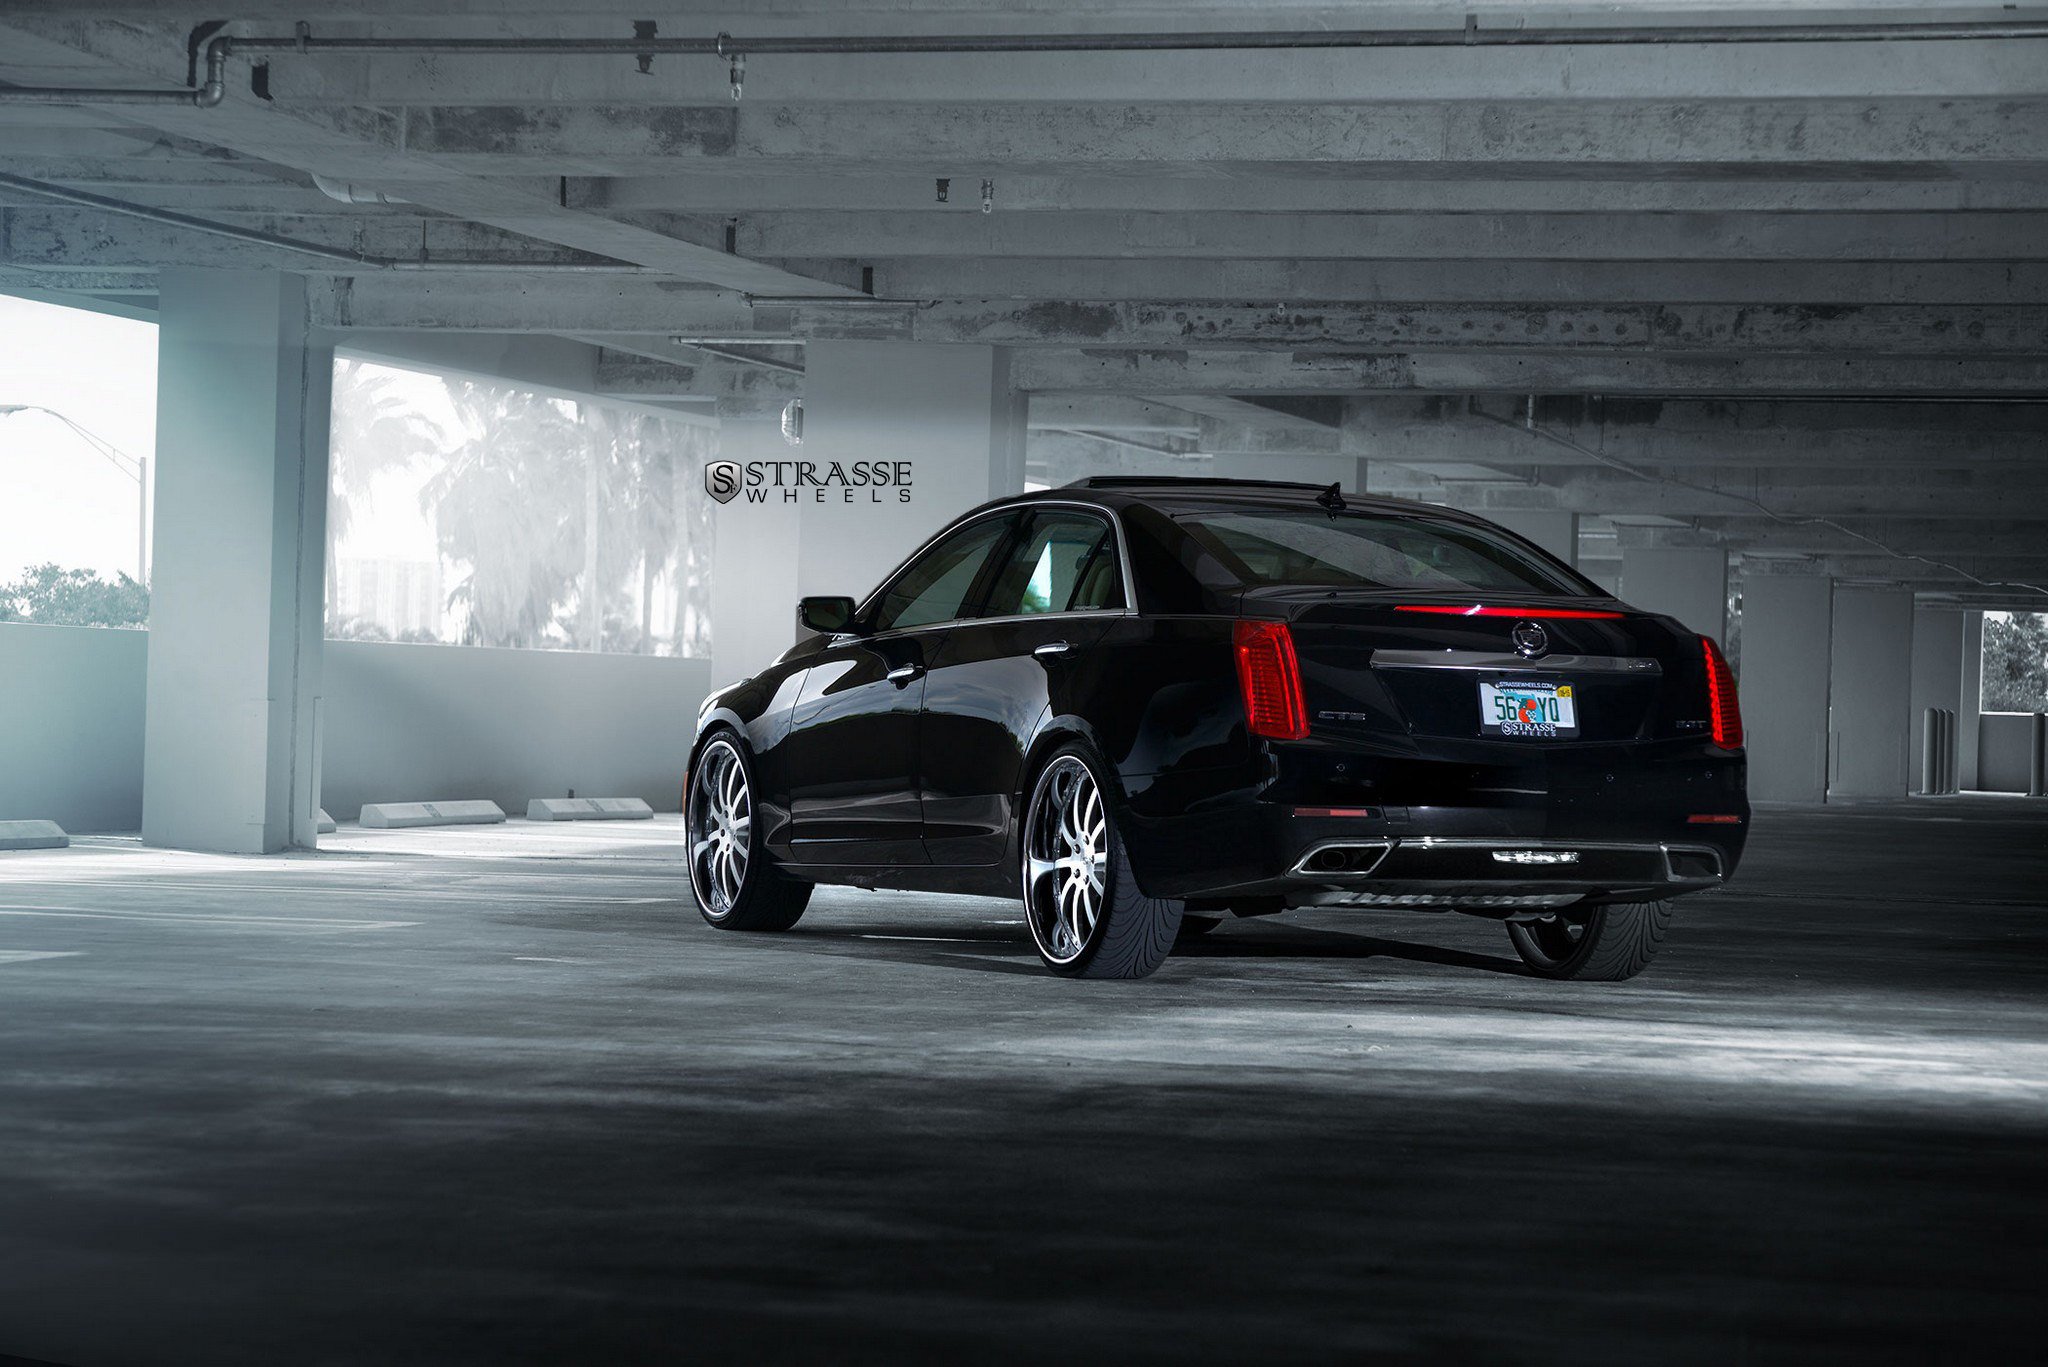 strasse, Wheels, Gallery, Cadillac, Cts, Black, Cars, Coupe Wallpaper